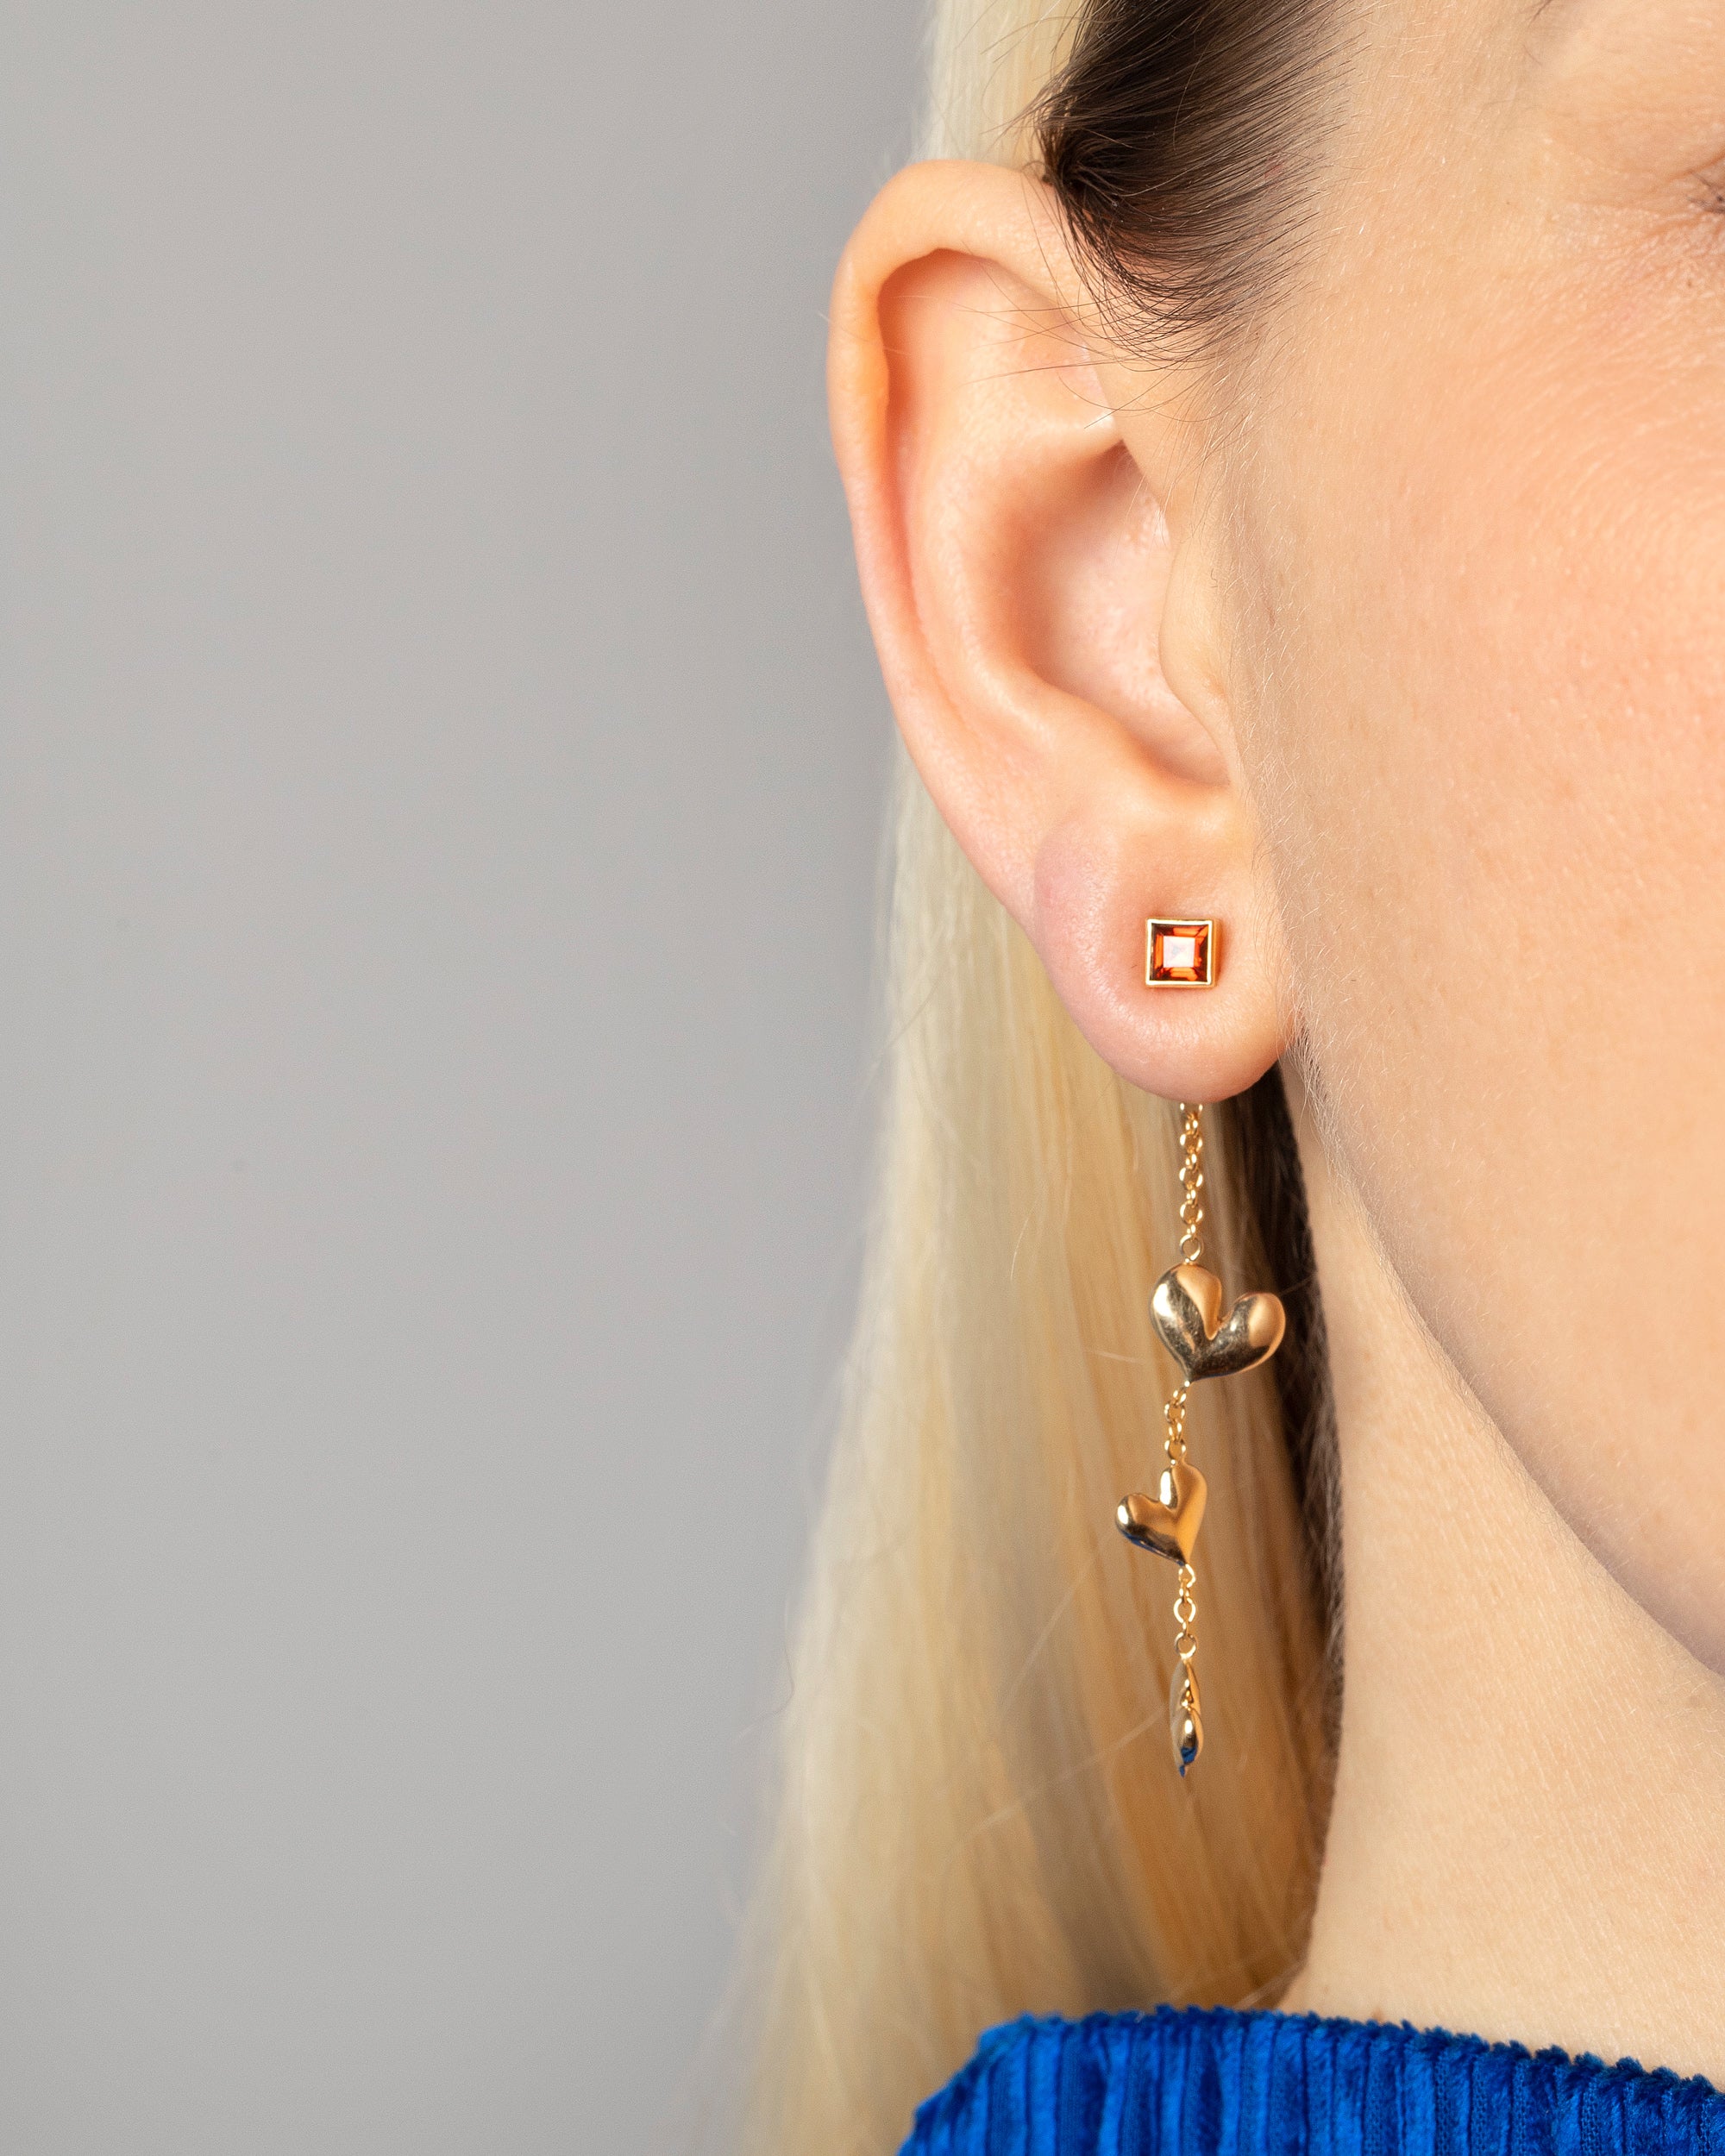 Master Multiple Ear Piercings With These Trending Earring Styles